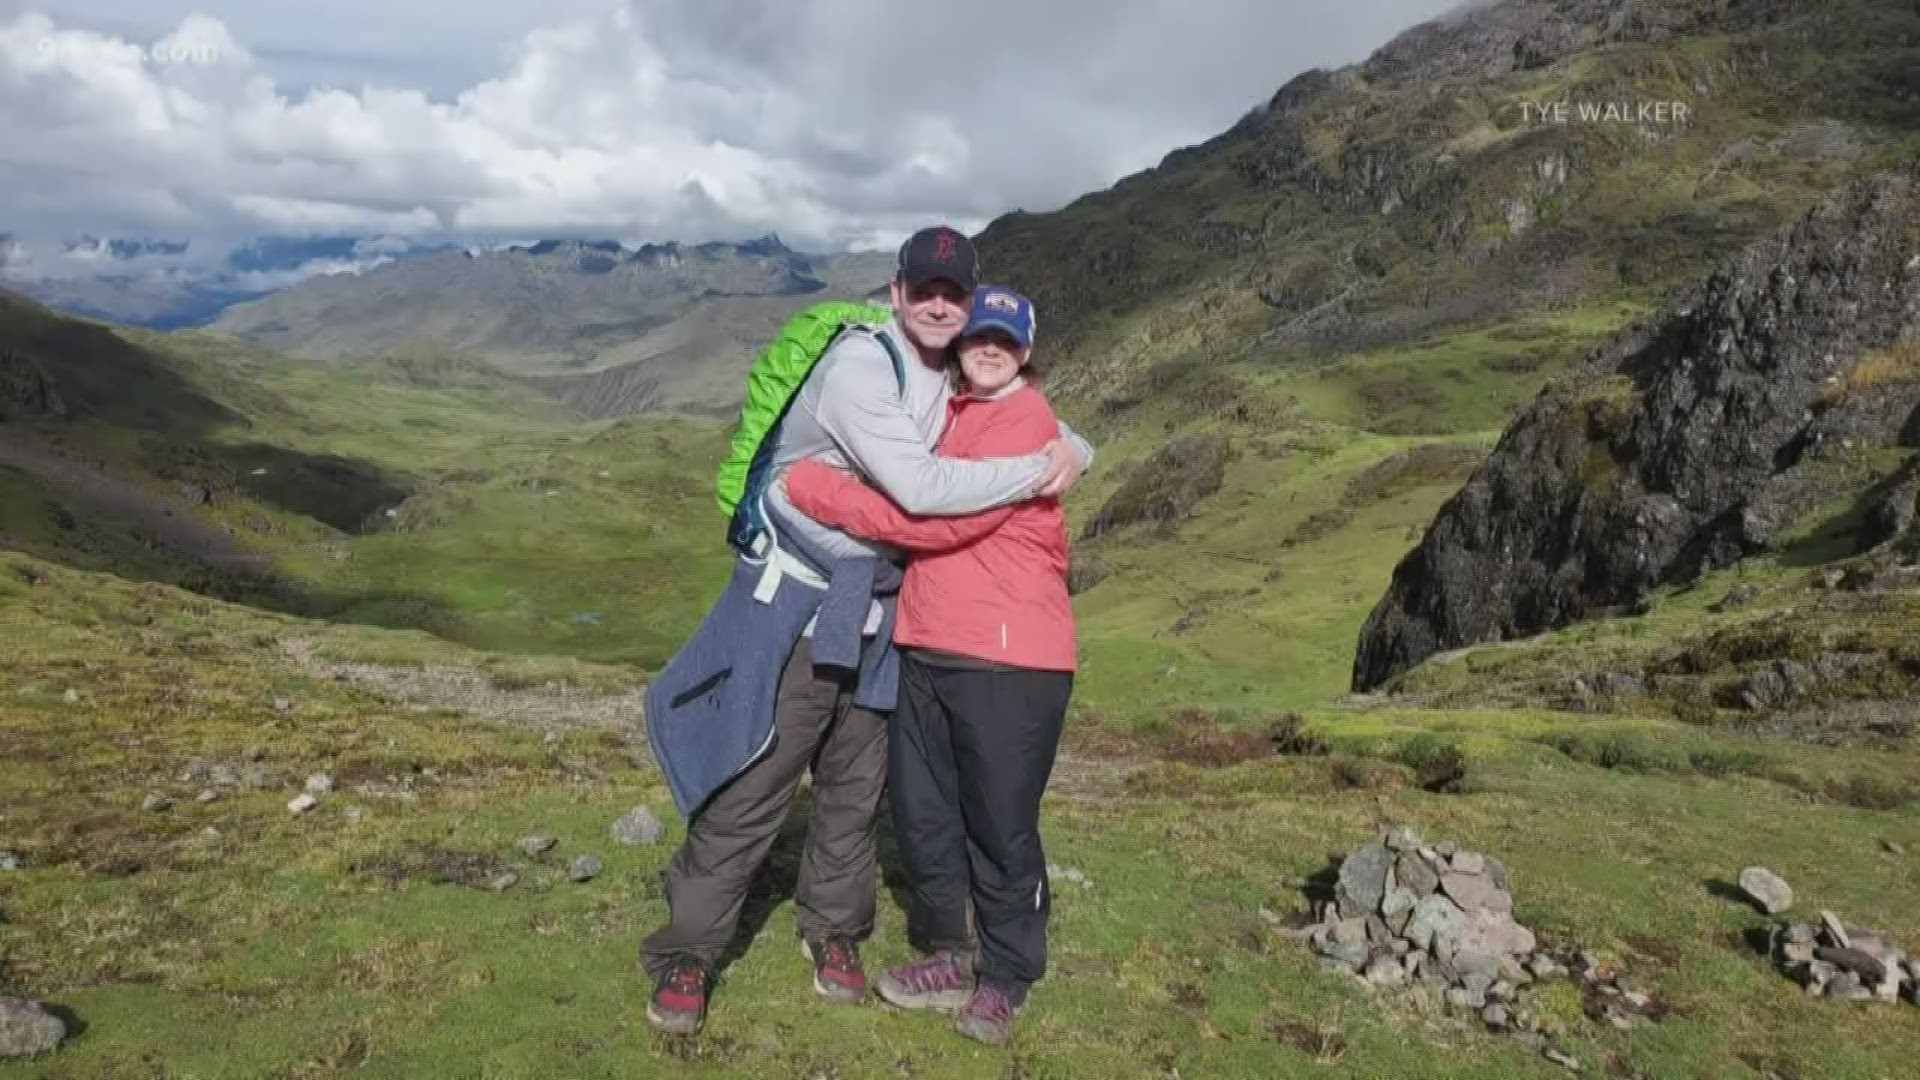 The couple from Highlands Ranch were on a hike to Machu Picchu when their guide cut it short.